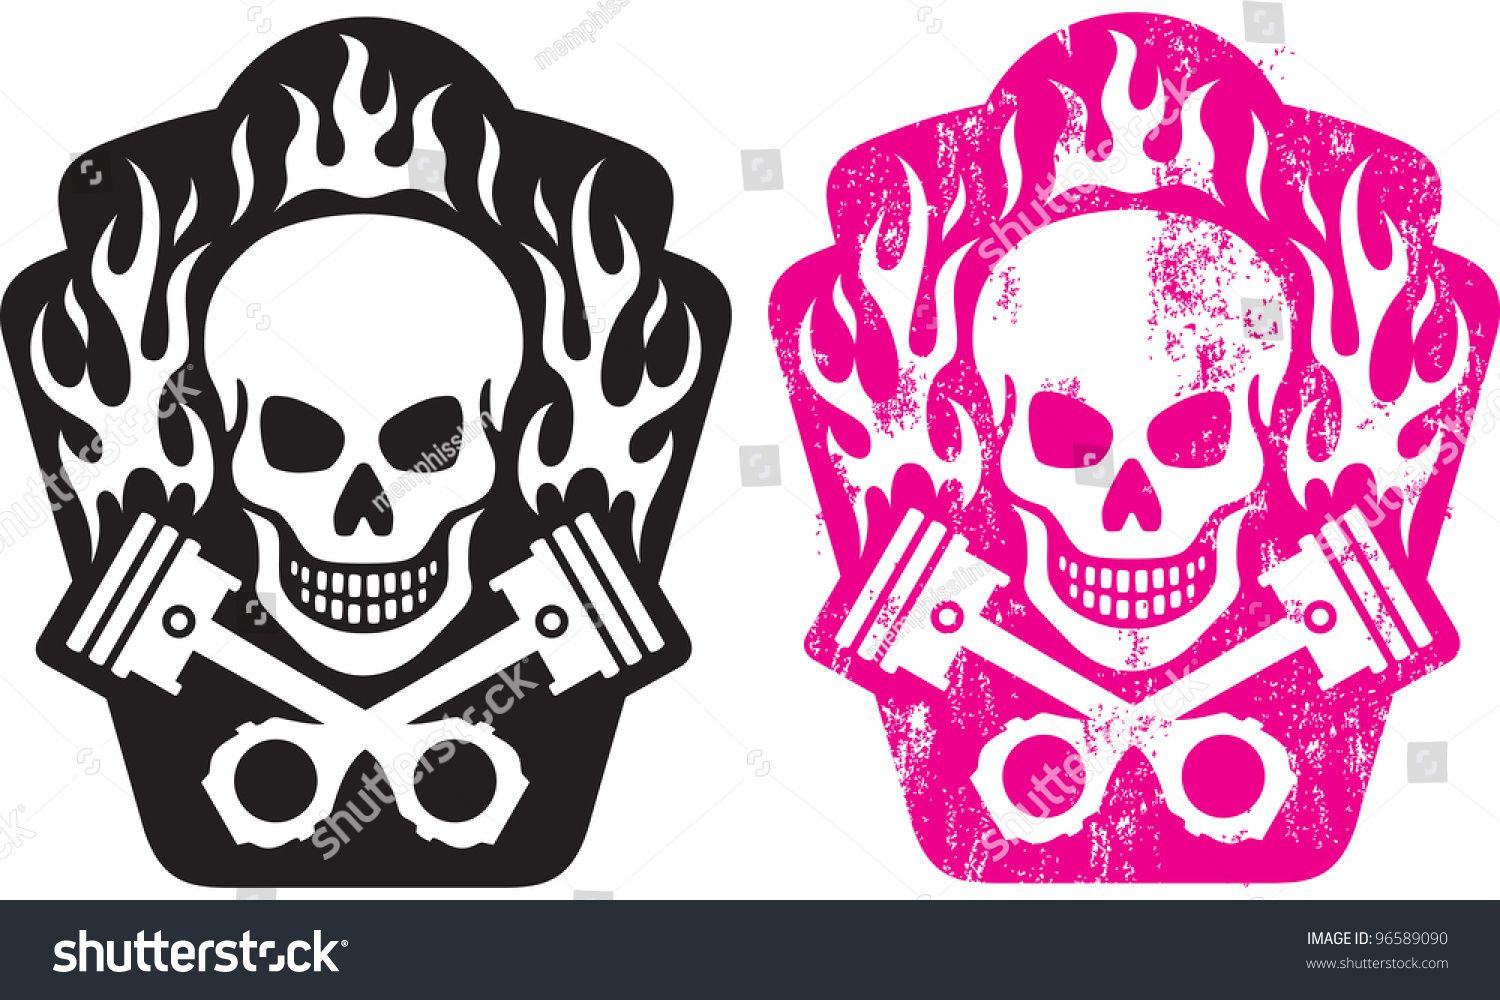 SVG of Vector illustration of skull and crossed pistons with flames. Includes clean and grunge versions. Easy to edit colors and shapes. svg